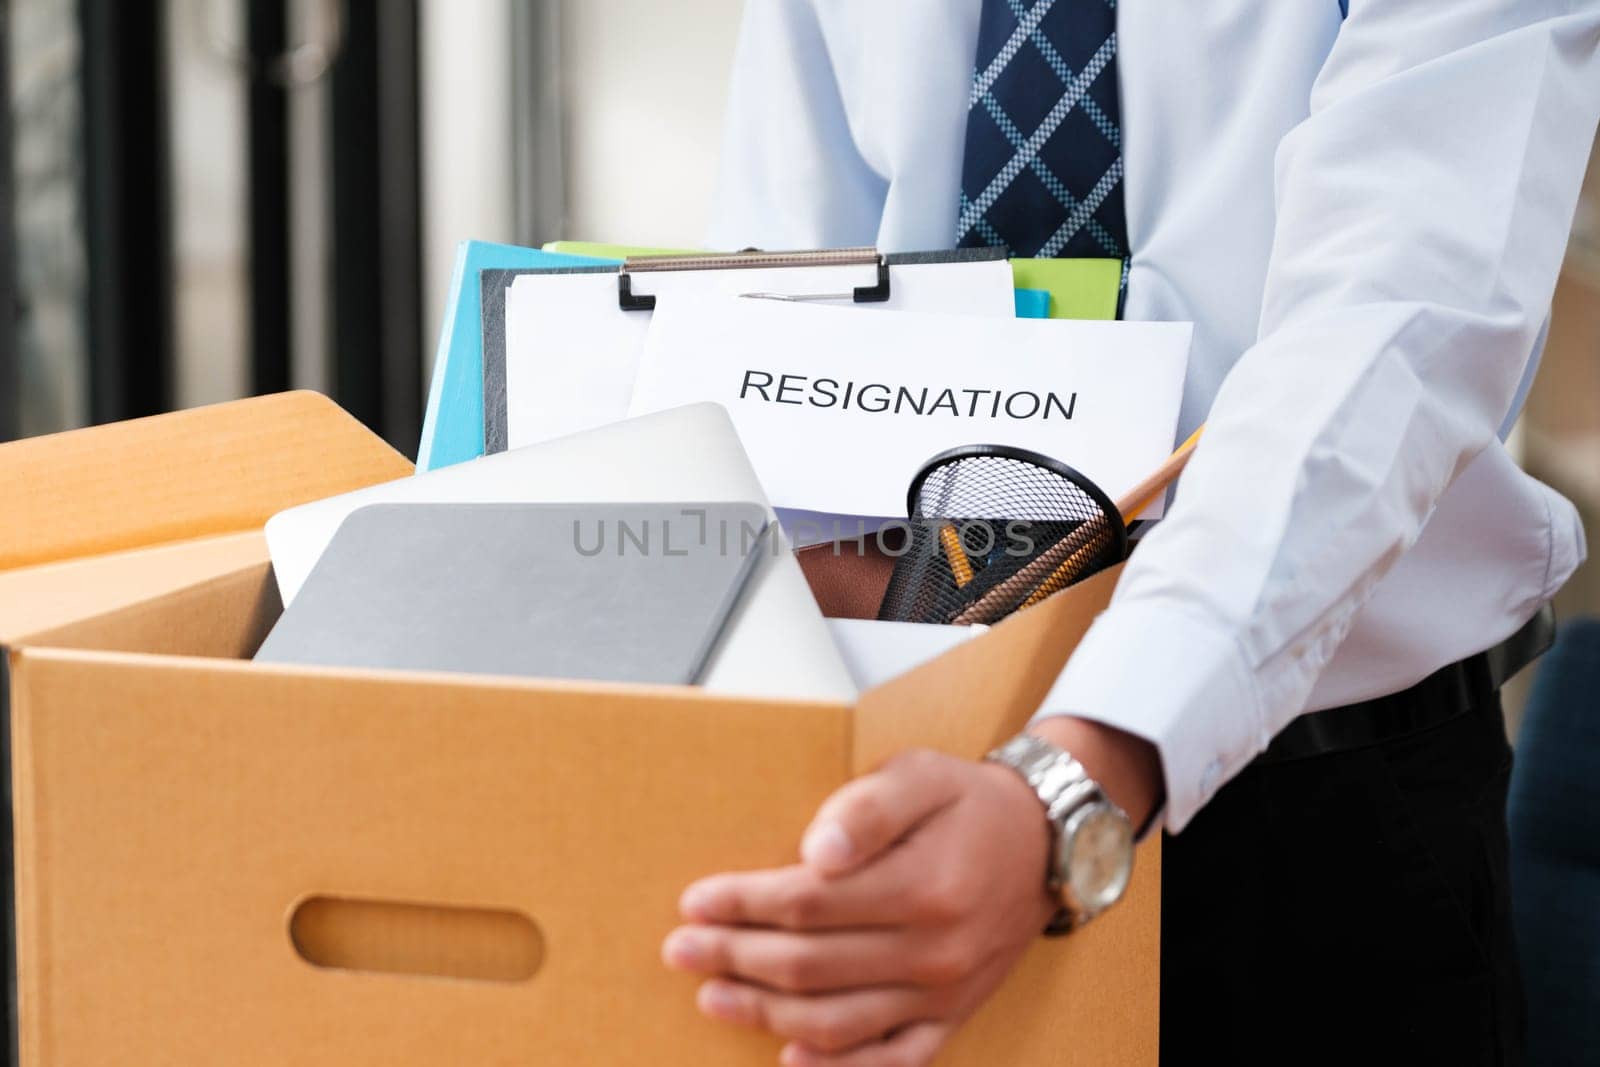 Man places personal items and resignation letter into a box, ending his tenure. by ijeab